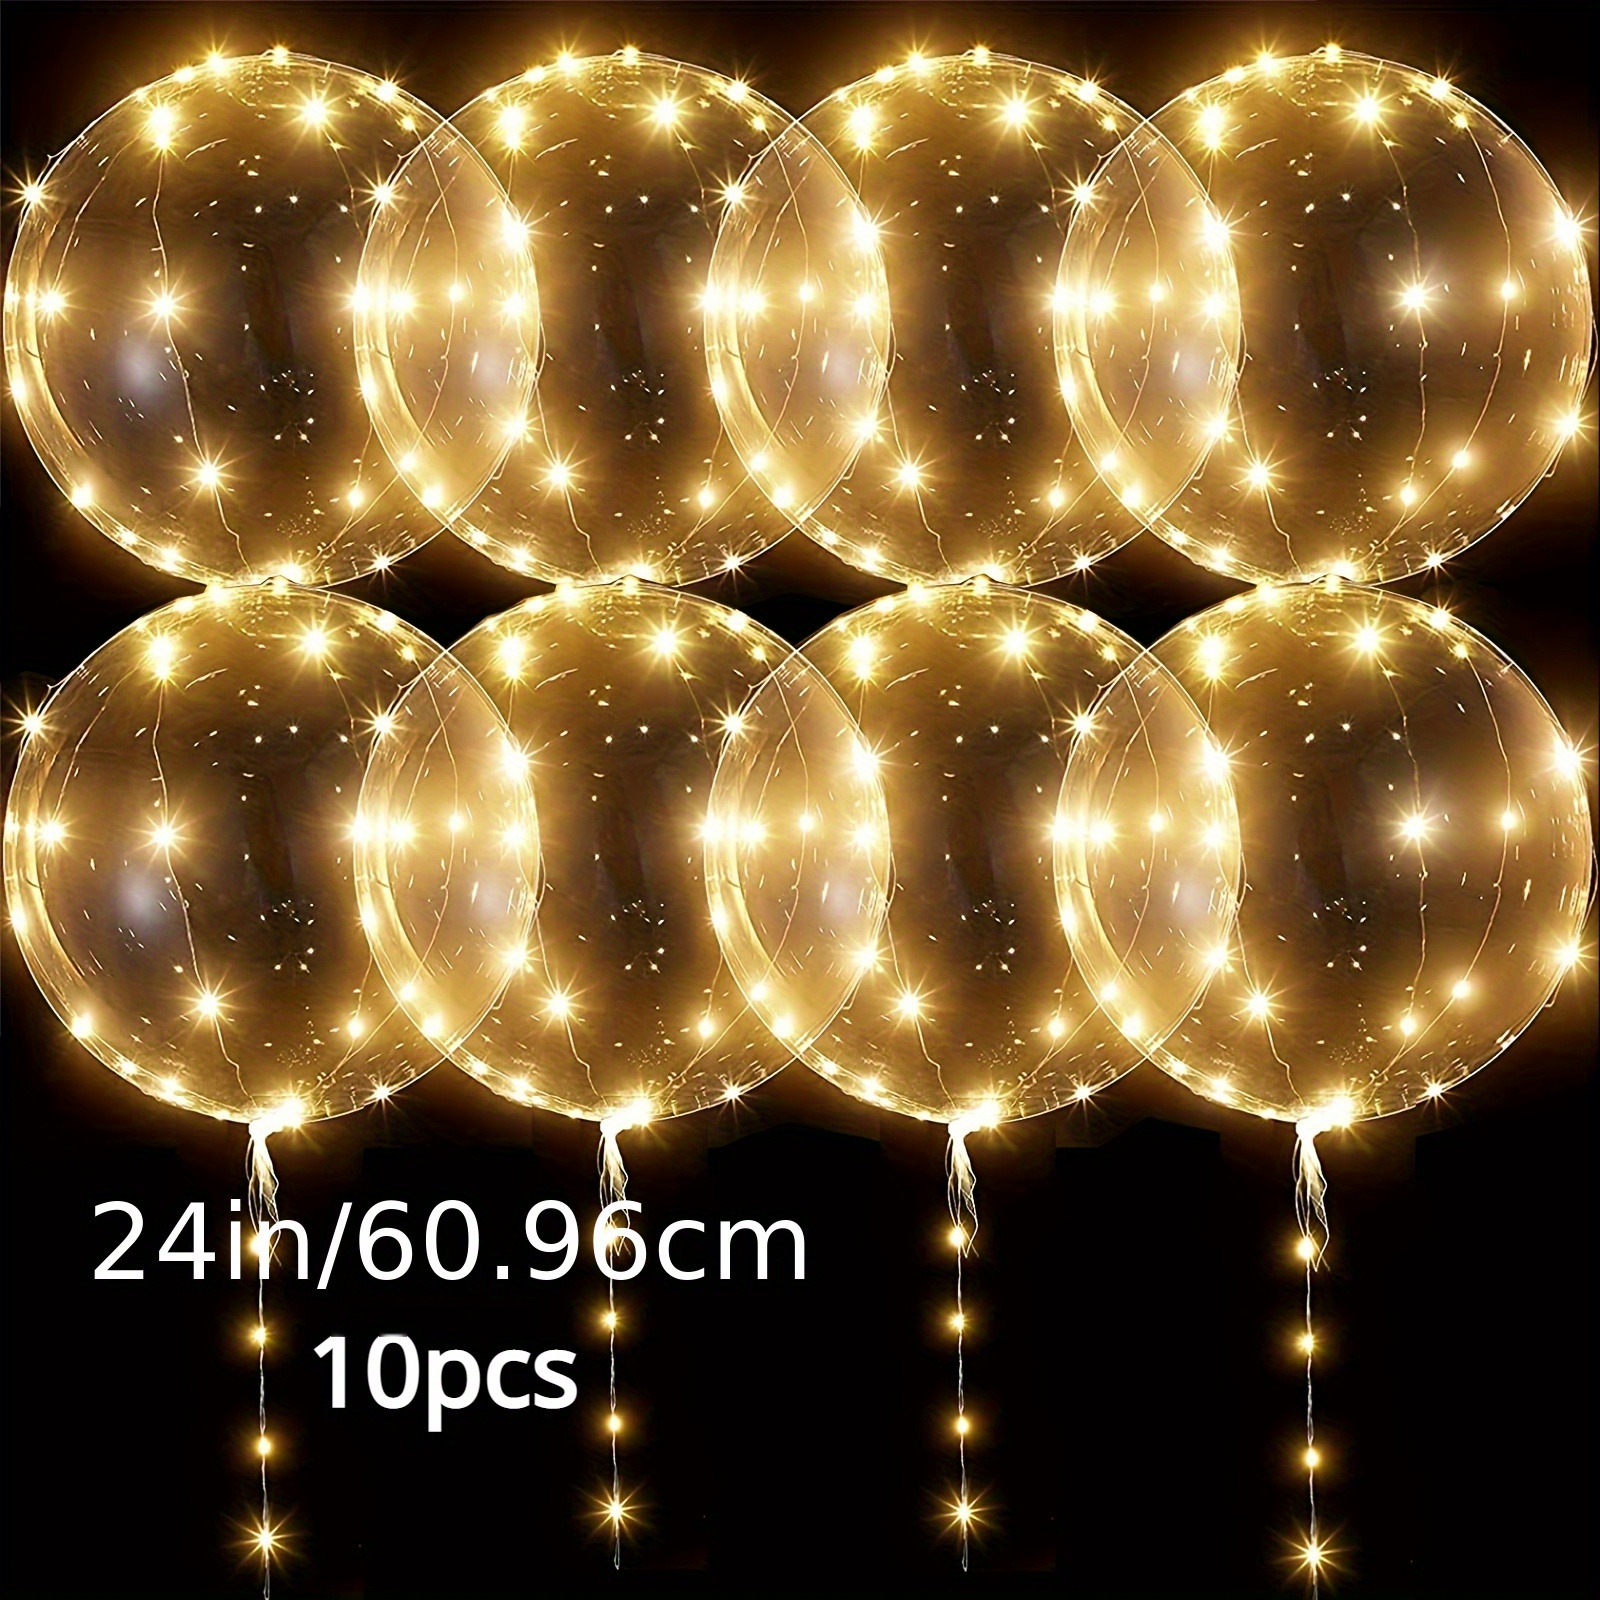 25 PCs Clear Bobo Balloons 12 inches Transparent Bubble Balloon for Light  Up LED Balloons,Christmas, Party Events, Wedding, Anniversary, Indoor and